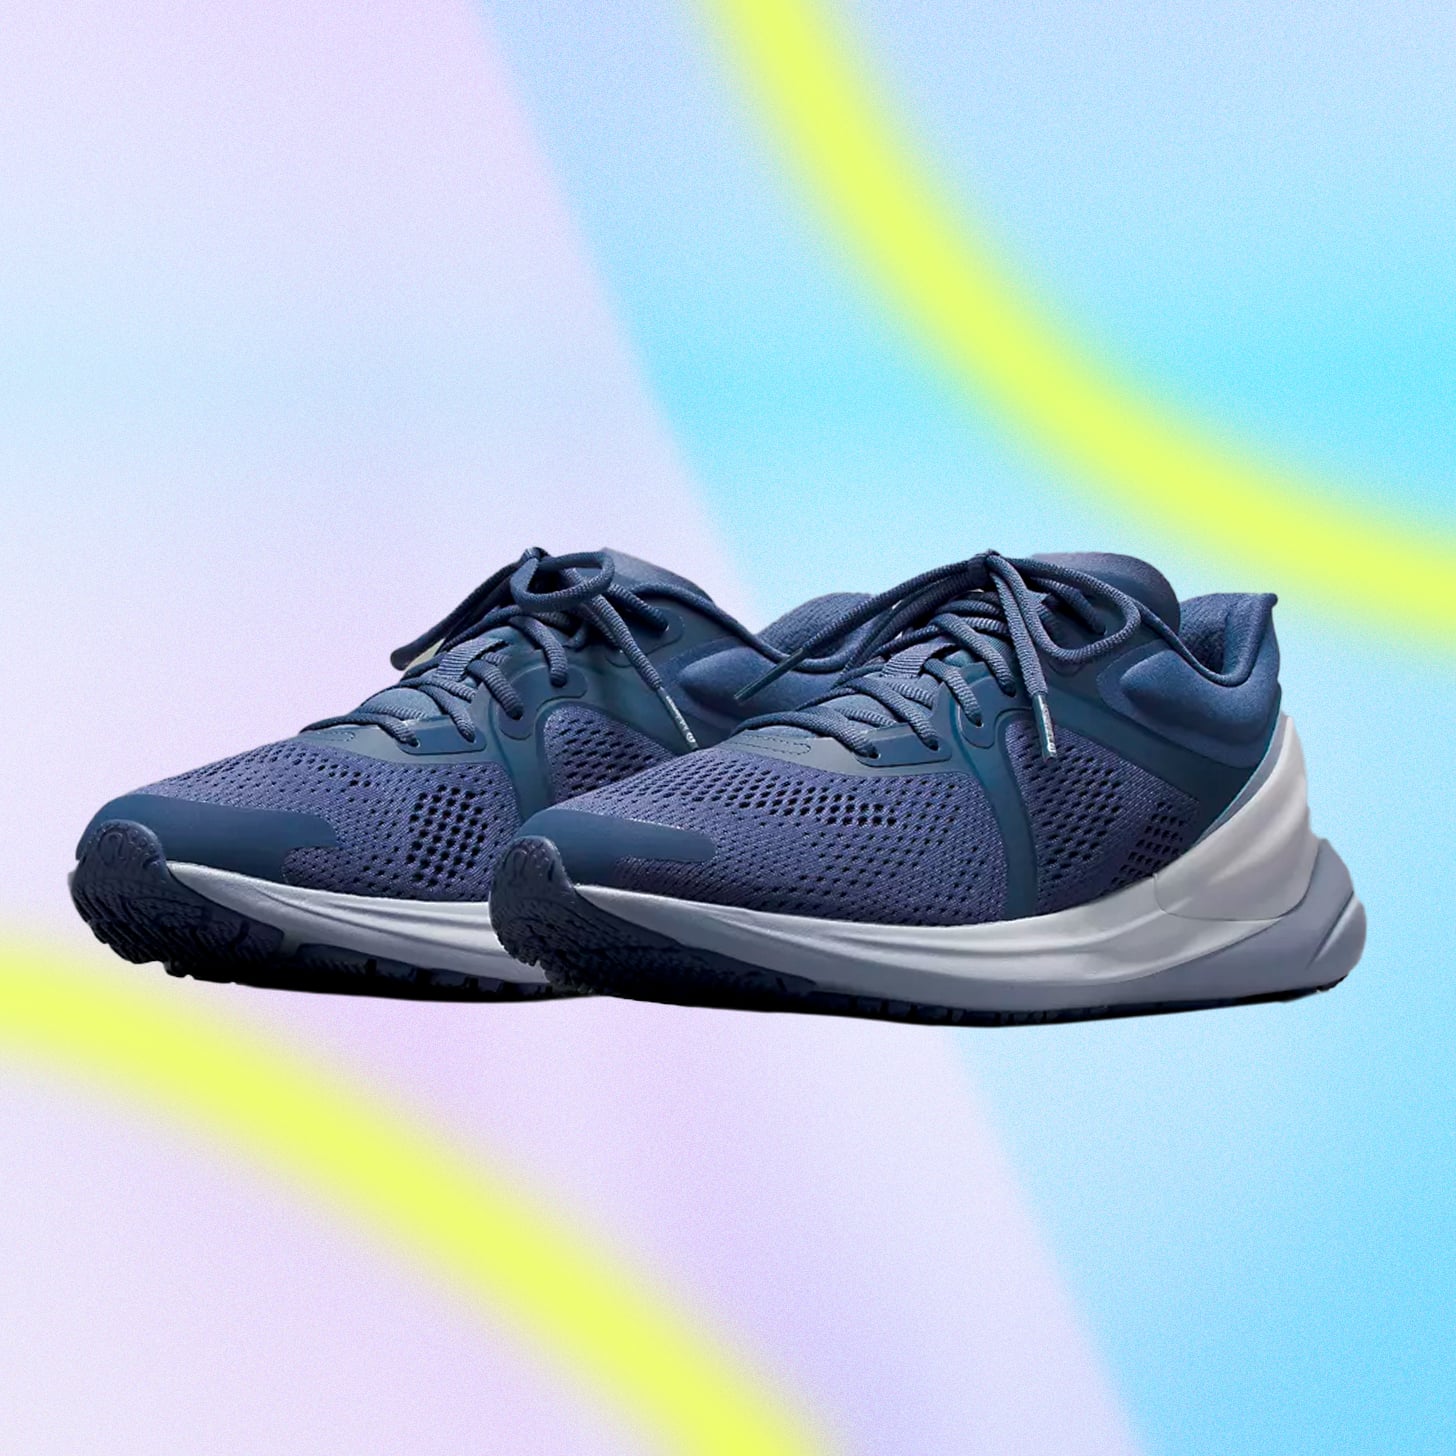 Lululemon Just Launched the Blissfeel 2 Running Shoe — Here's What